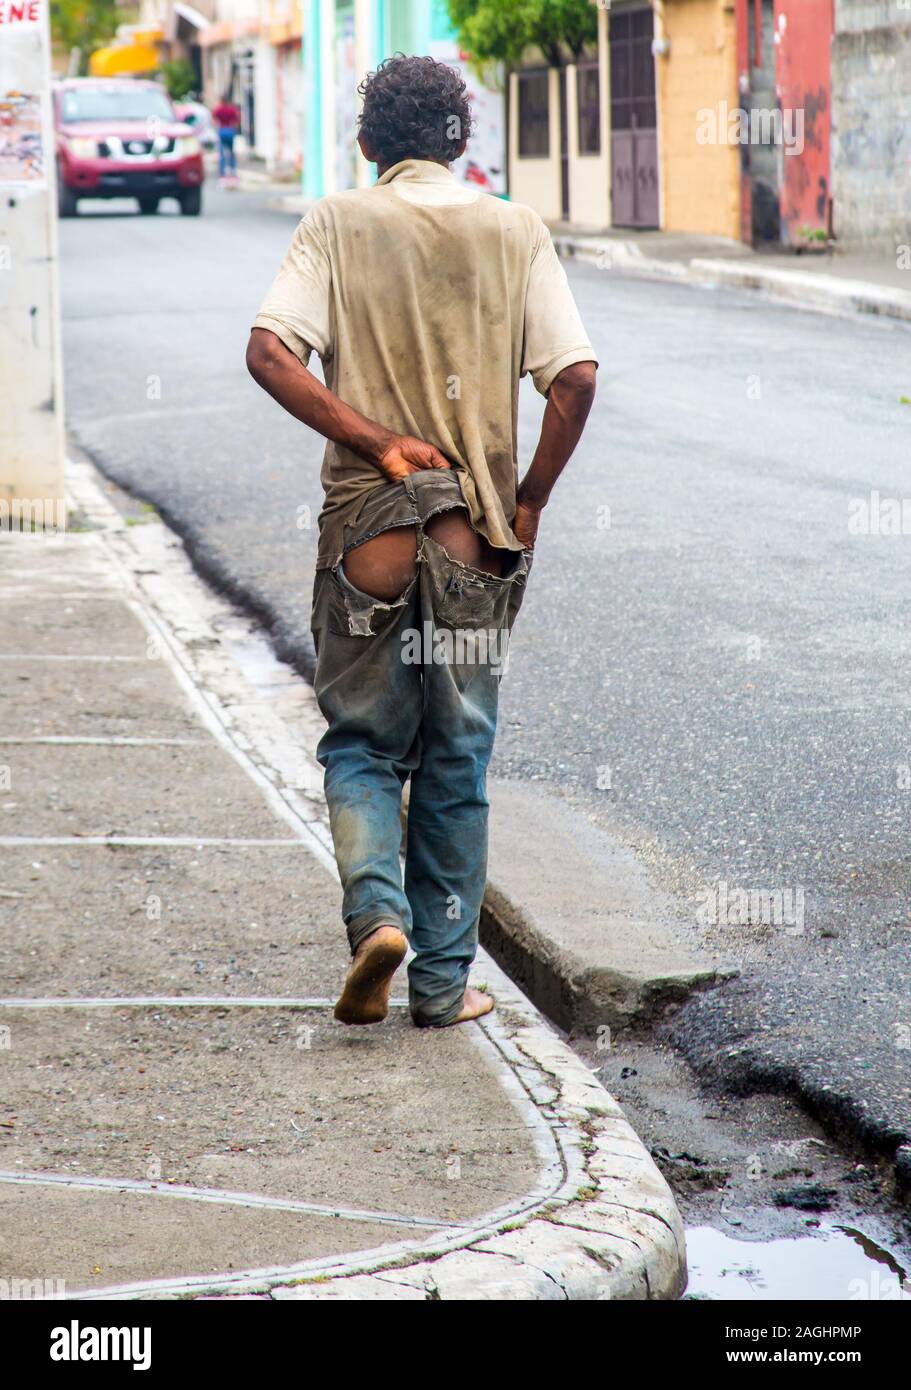 https://c8.alamy.com/comp/2AGHPMP/dramatic-image-of-a-poverty-stricken-dominican-man-walking-down-the-street-with-his-pants-falling-apart-barefoot-2AGHPMP.jpg